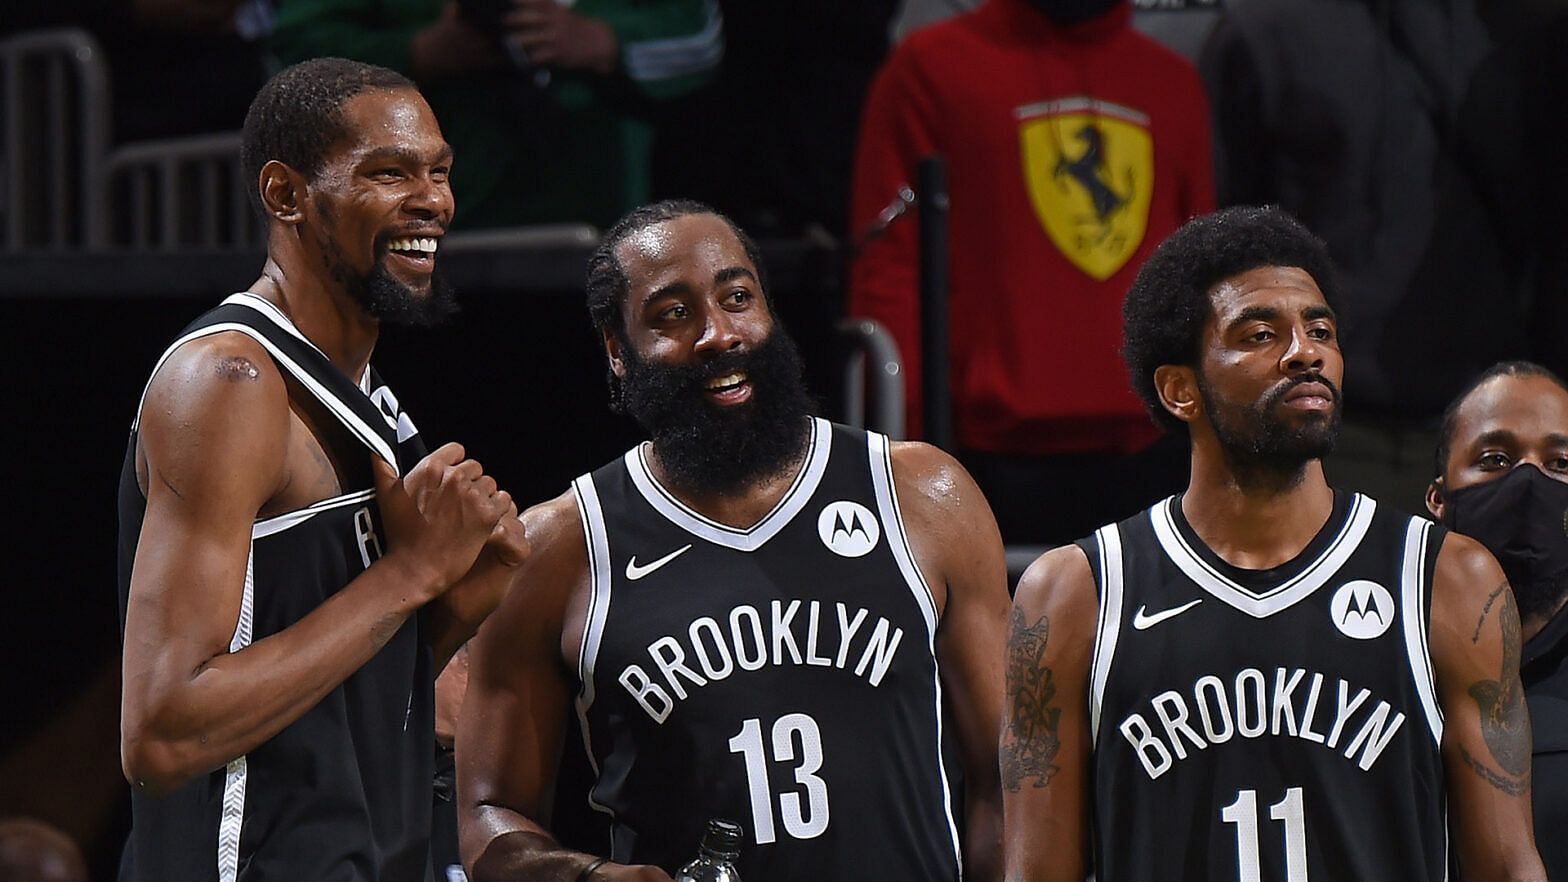 Brooklyn has been a good road team even before Kyrie Irving rejoined the team. [Photo: NBA.com]